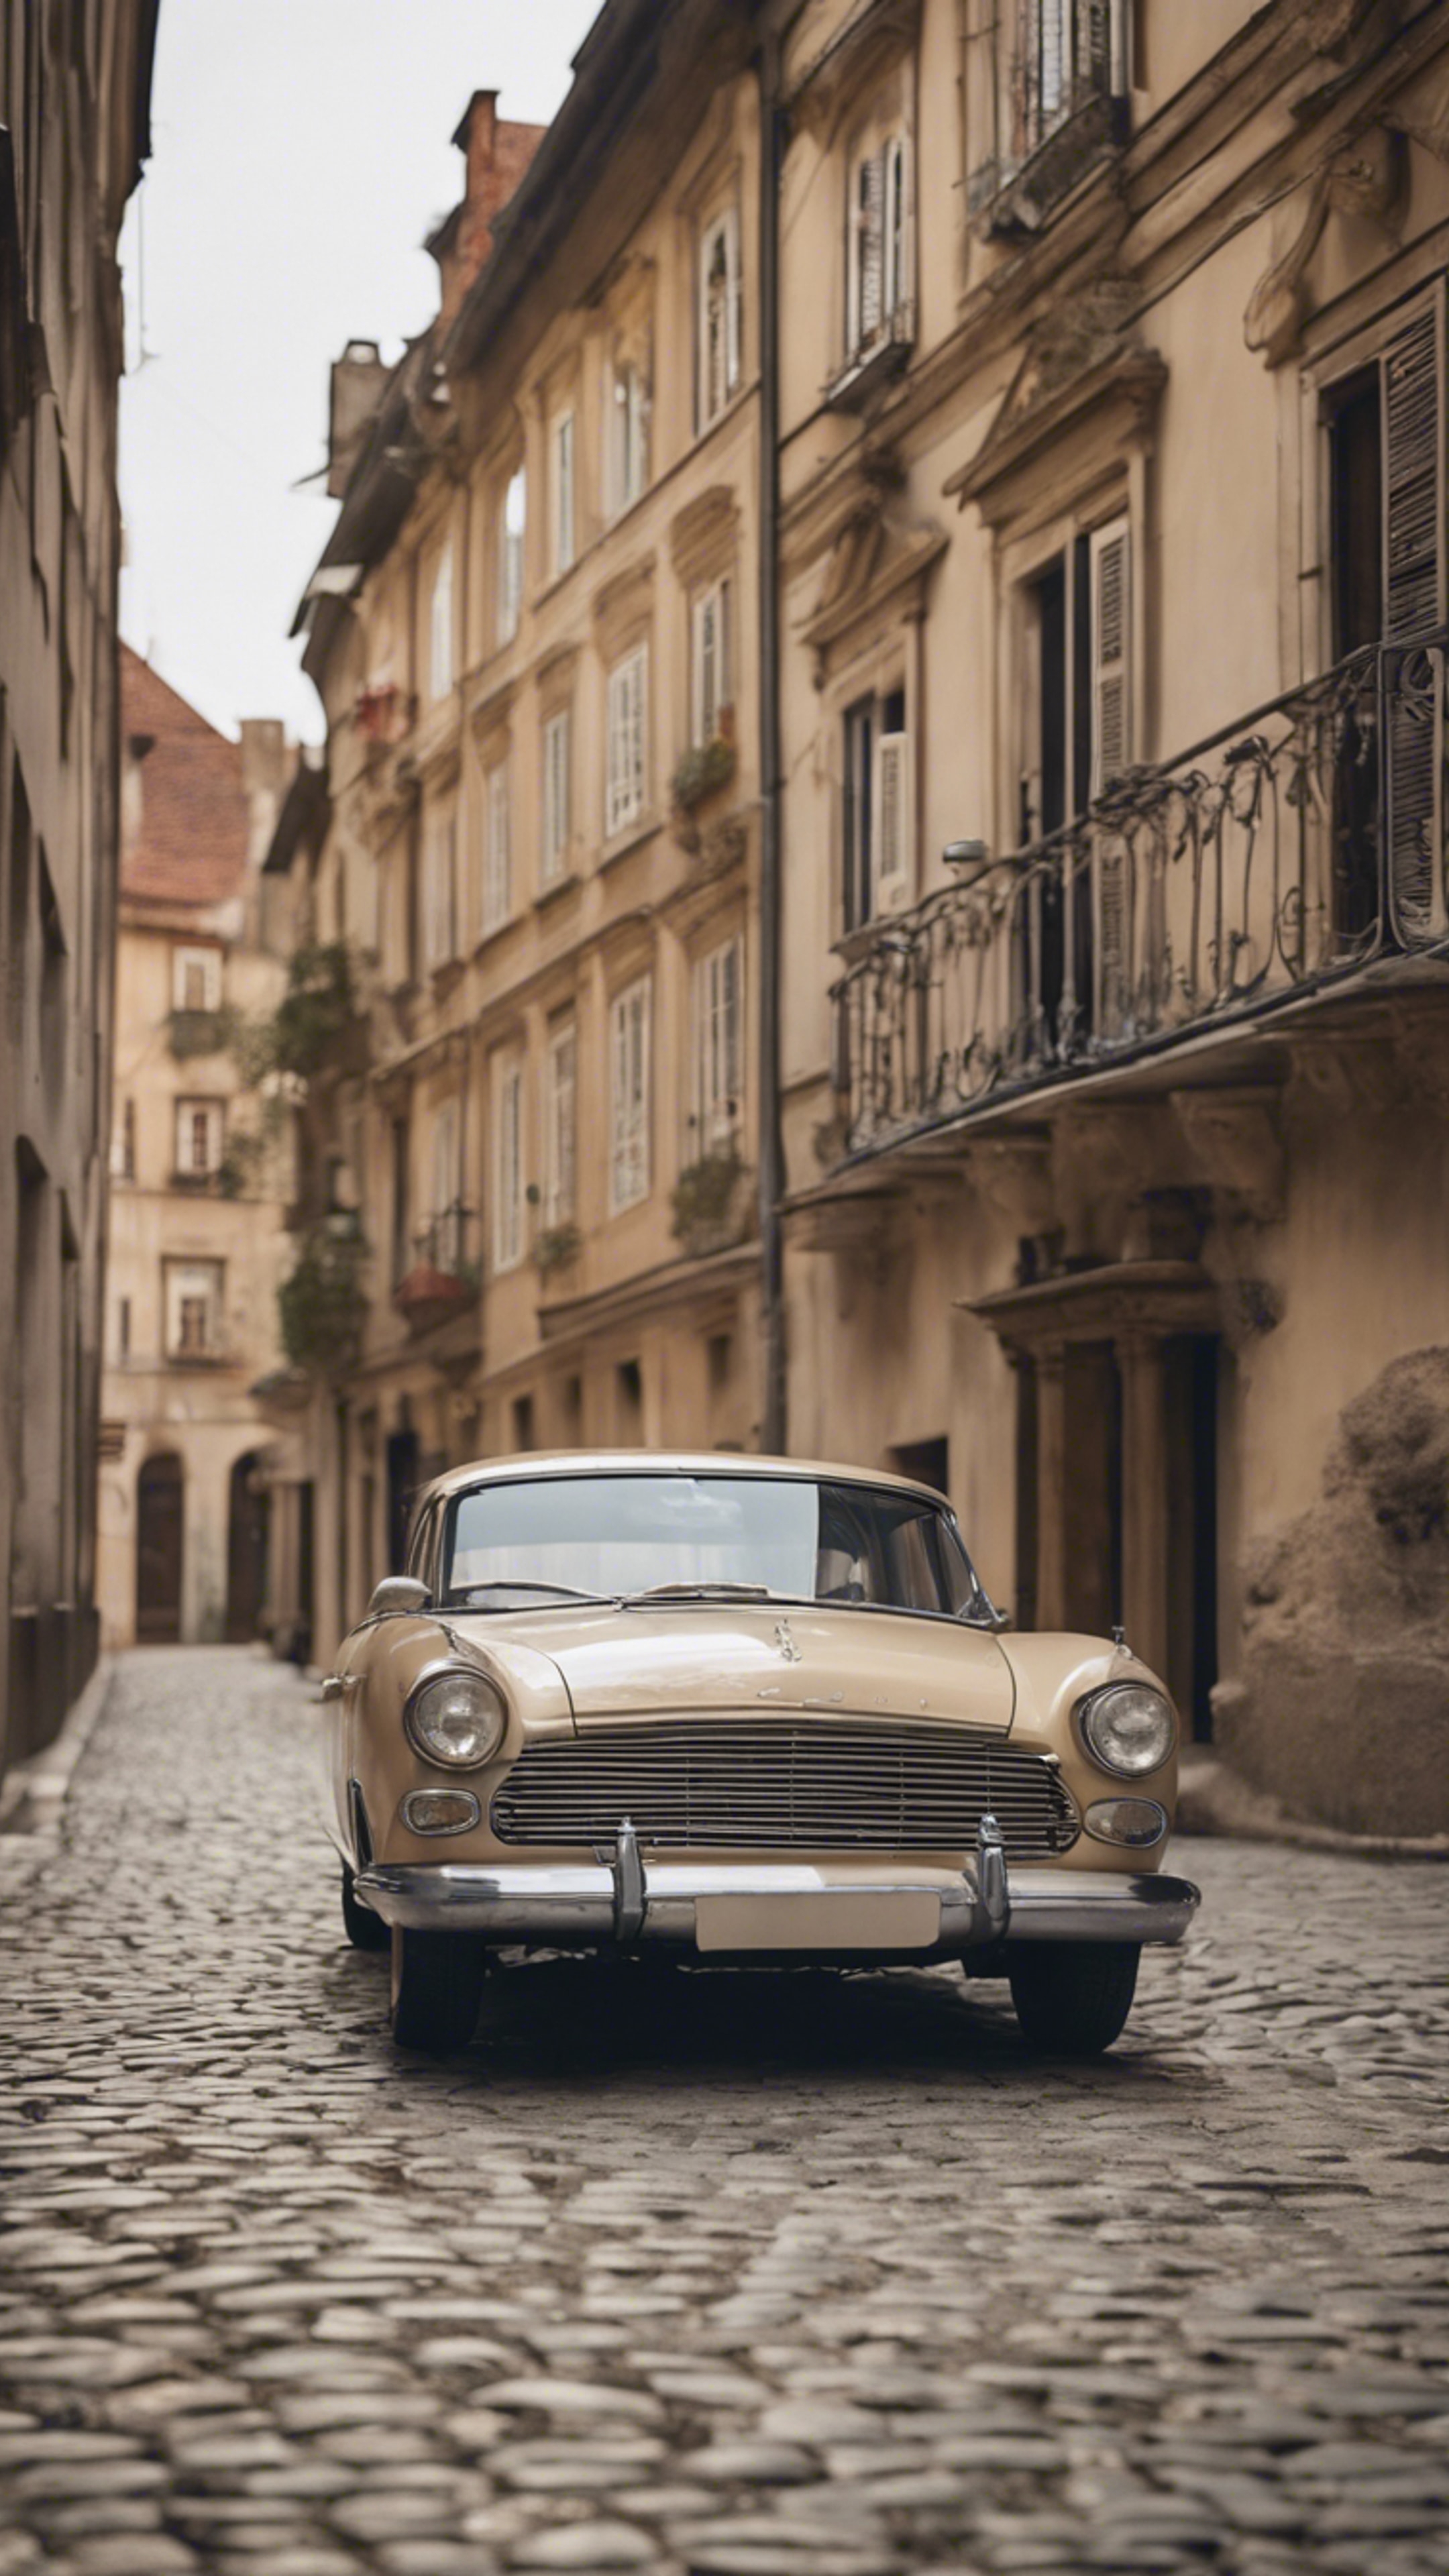 A beige classic car parked on a cobblestone street with rustic buildings in the background. Tapéta[31a873a8b96b4be69c6a]